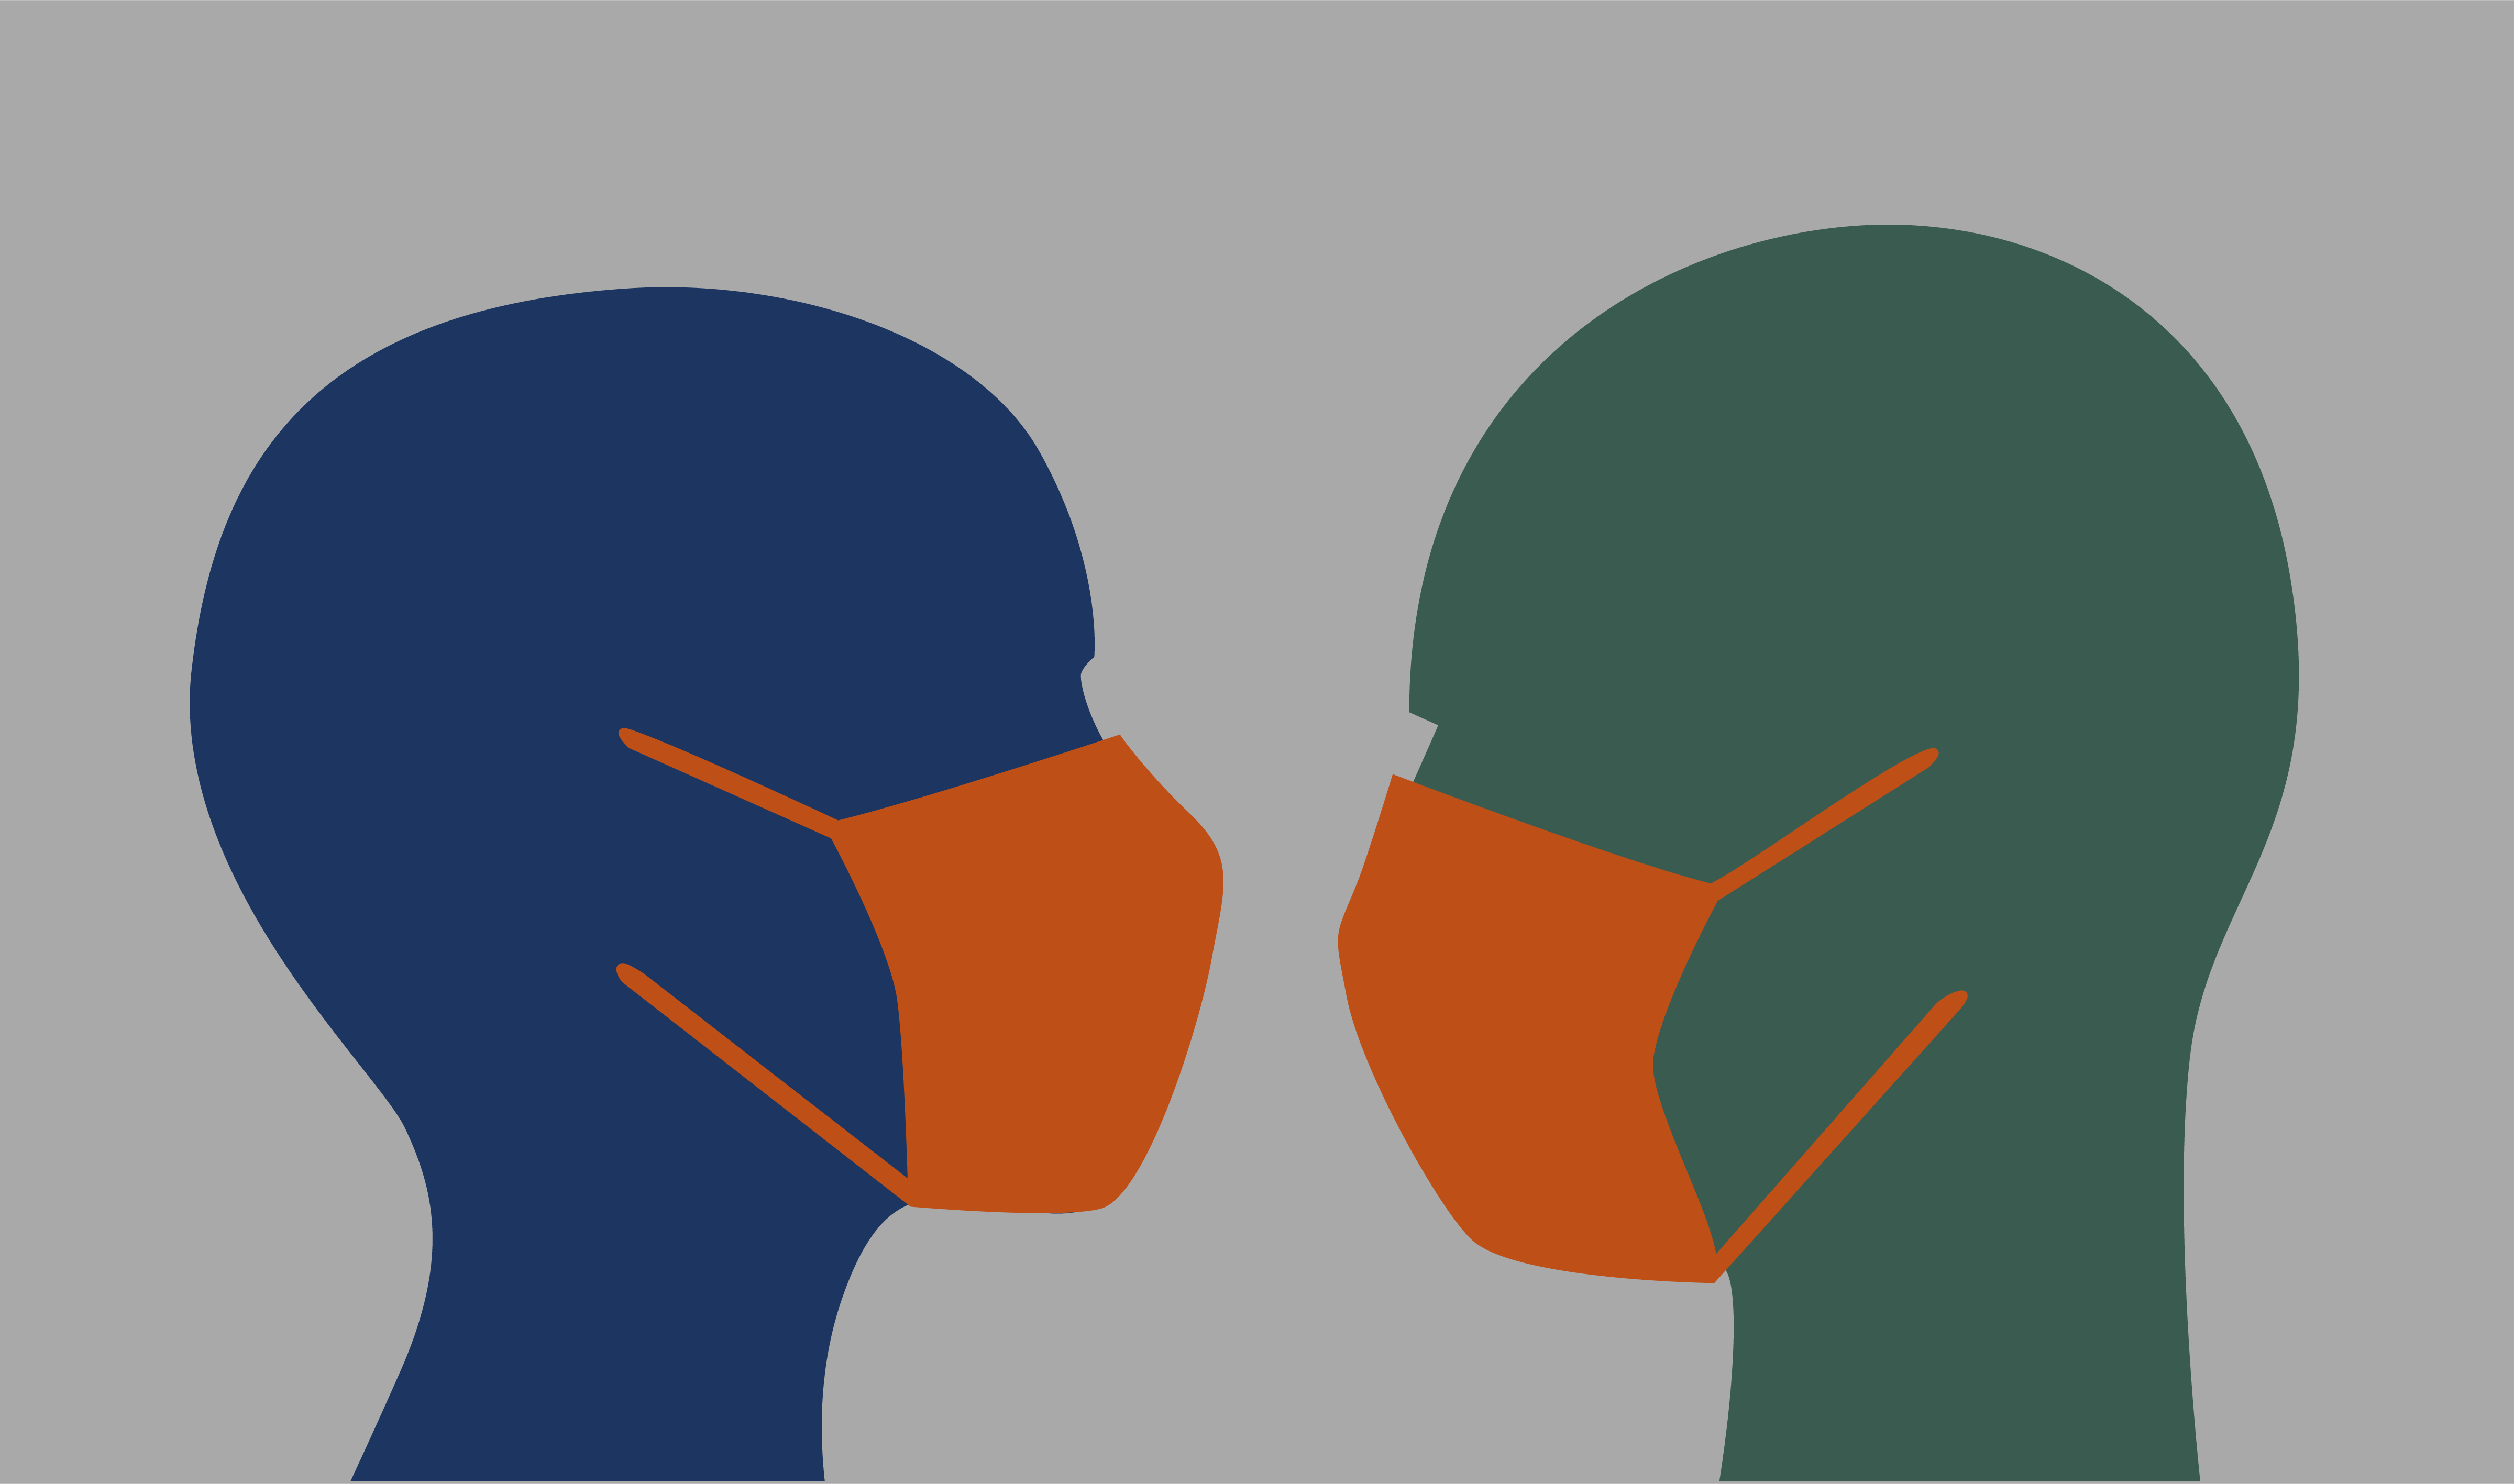 An illustration of the silhouette of 2 heads facing each other. They are both wearing surgical masks.